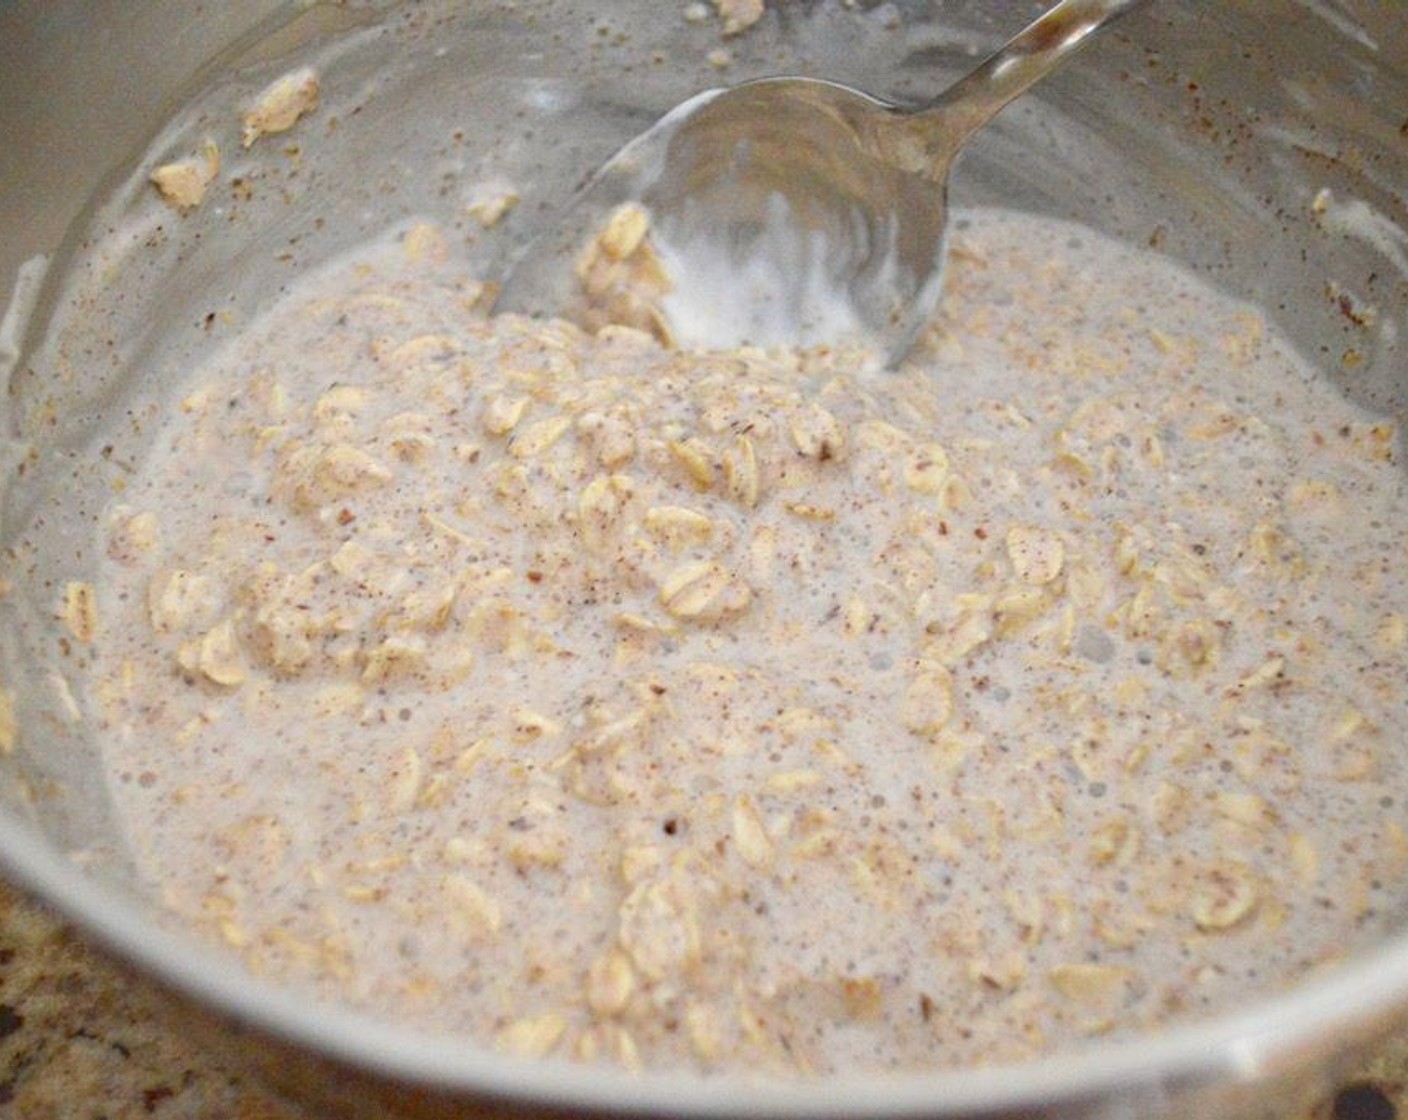 step 1 Stir the Old Fashioned Rolled Oats (1 cup), Milk (1/2 cup), Vanilla Greek Yogurt (1 carton), Ground Flaxseed (1 Tbsp), and Ground Cinnamon (1/2 tsp) together thoroughly in a big mixing bowl. Divide the mixture evenly among two mason jars.